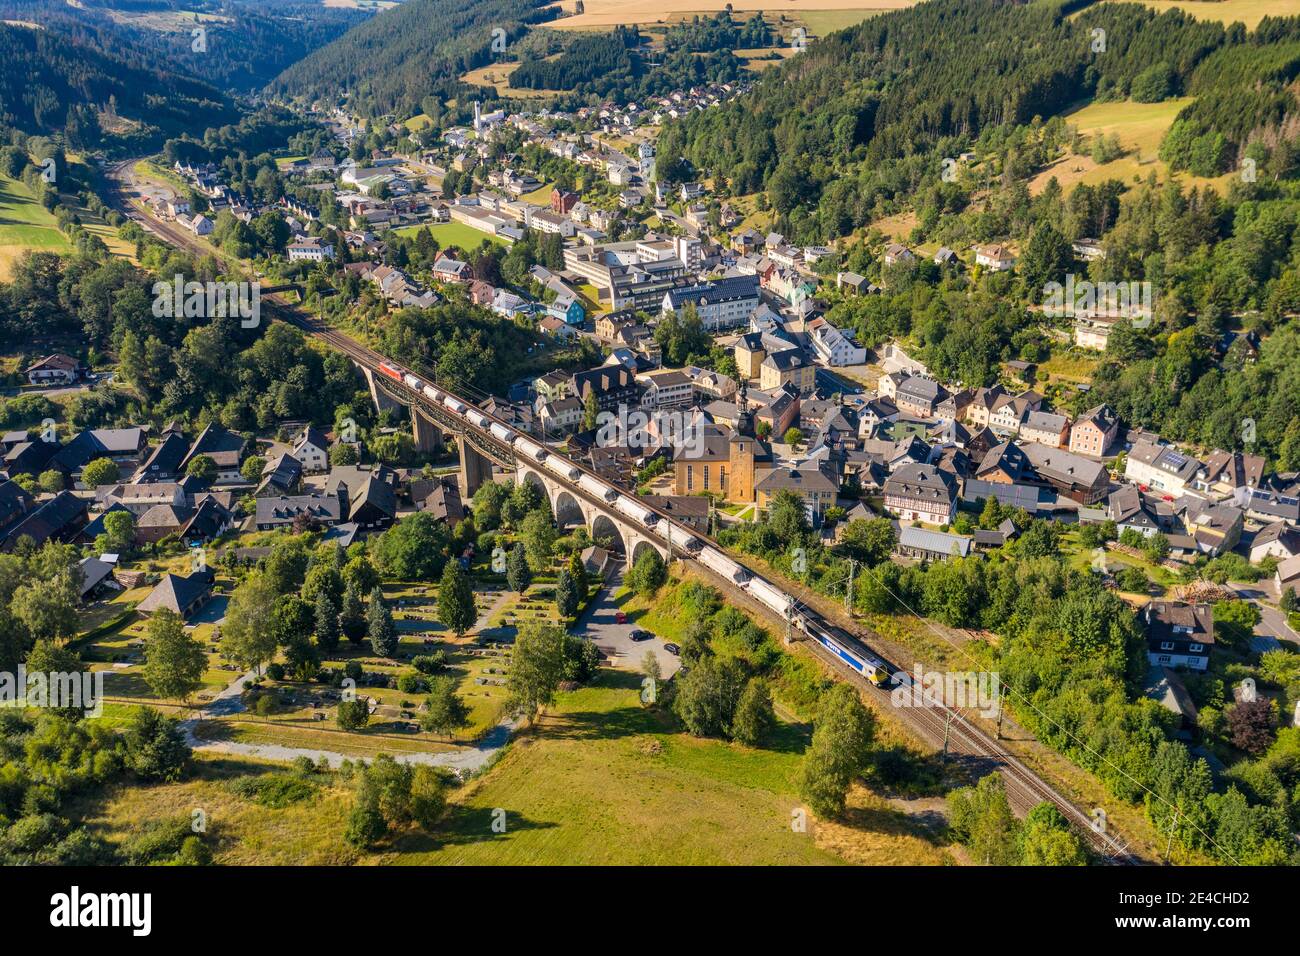 Germany, Bavaria, Ludwigsstadt, train, bridge, city, church, houses, aerial view, oblique view Stock Photo